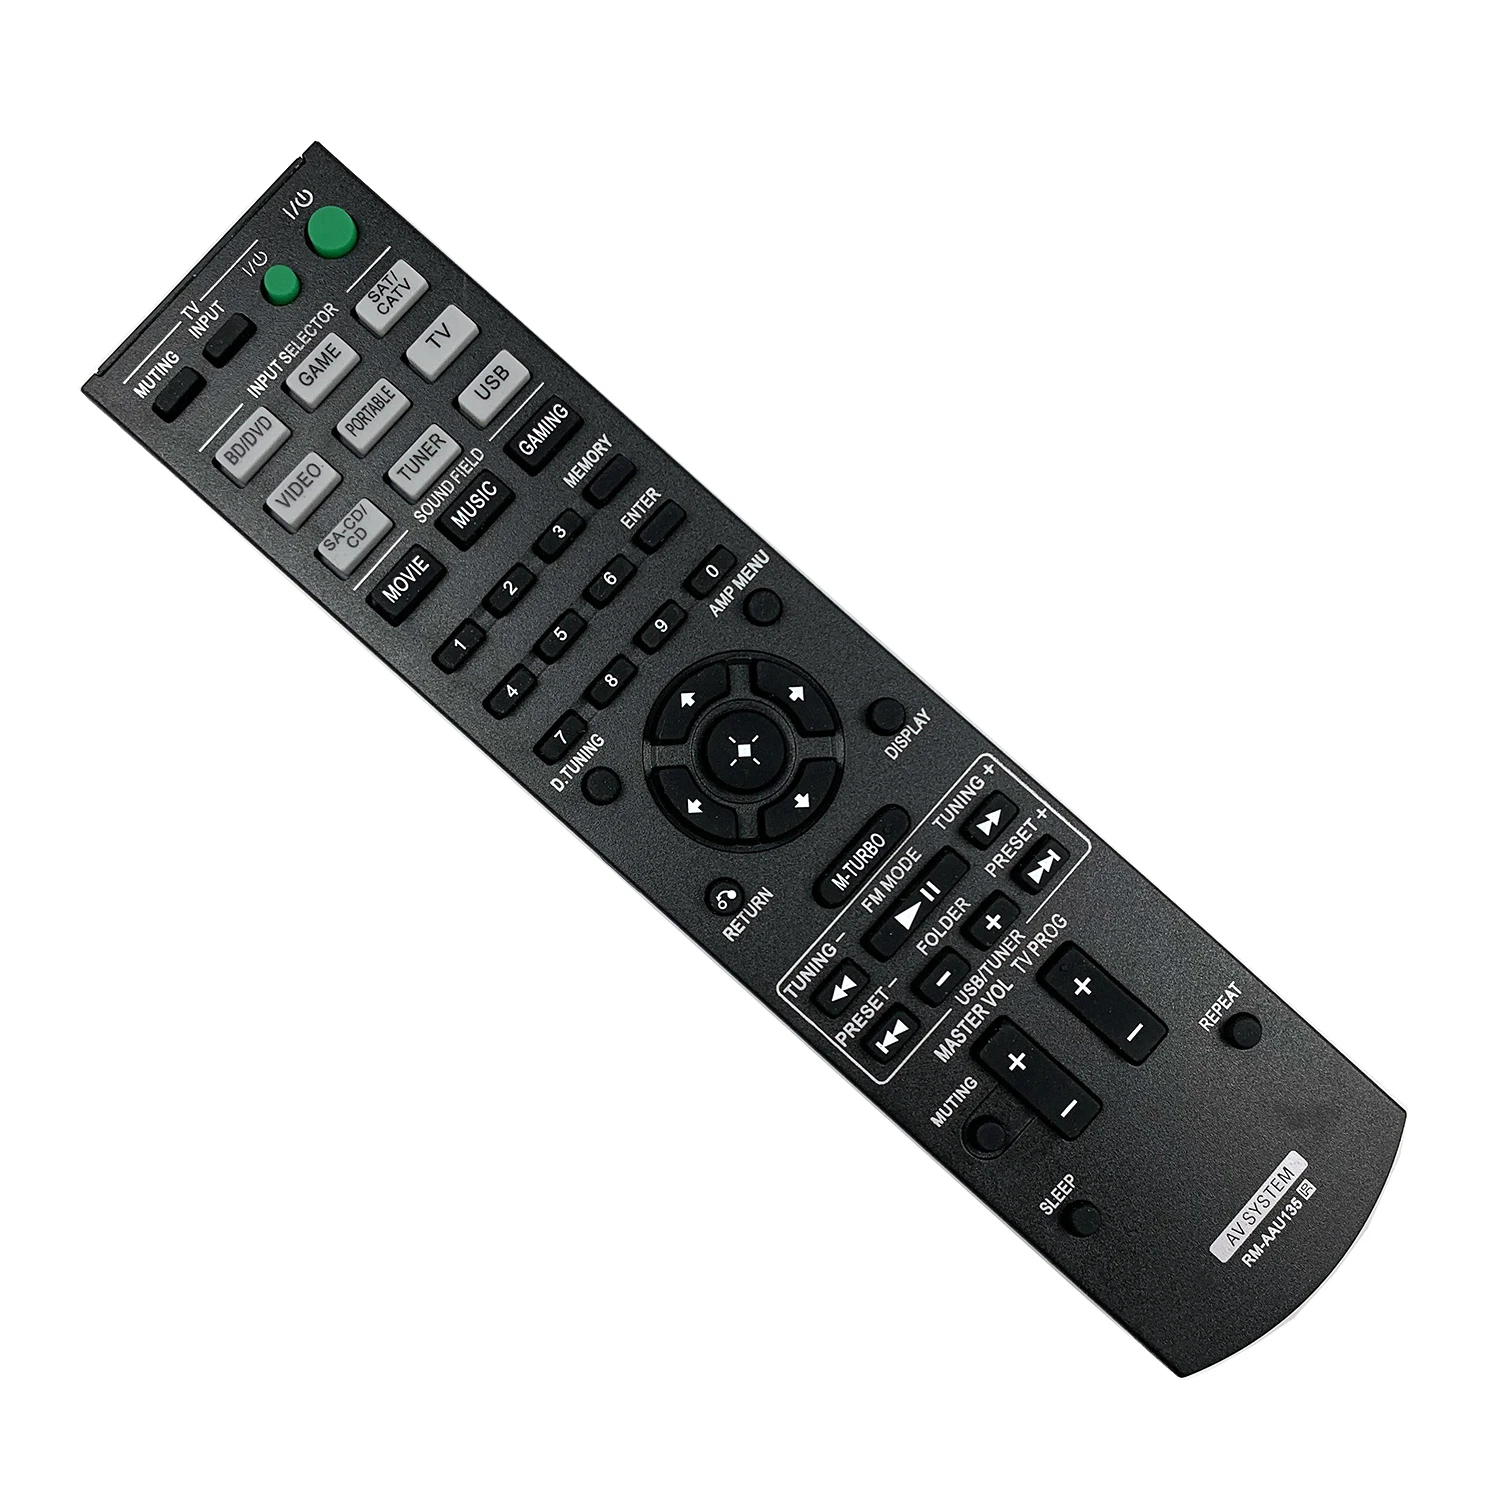 RM-AAU135 Replaced Remote For Sony Home Theatre System HT-M3 HT-M5 HT-M7 STR-KM3 STR-KM5 STR-KM7 RM-AAU136 SS-MSP7M SS-CNP7M